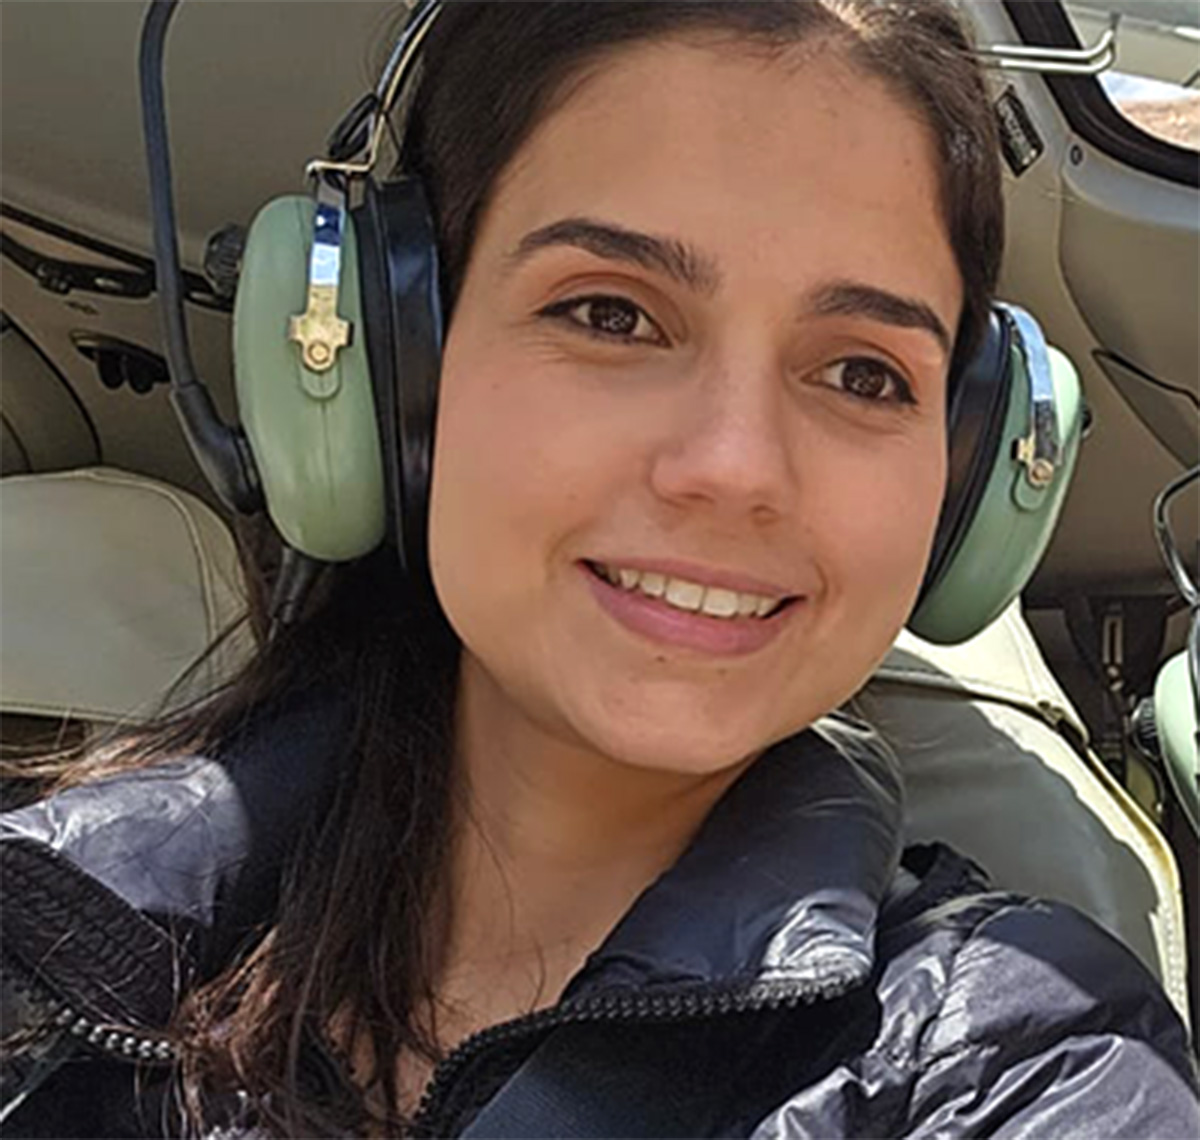 A selfie of a woman on a helicopter tour.